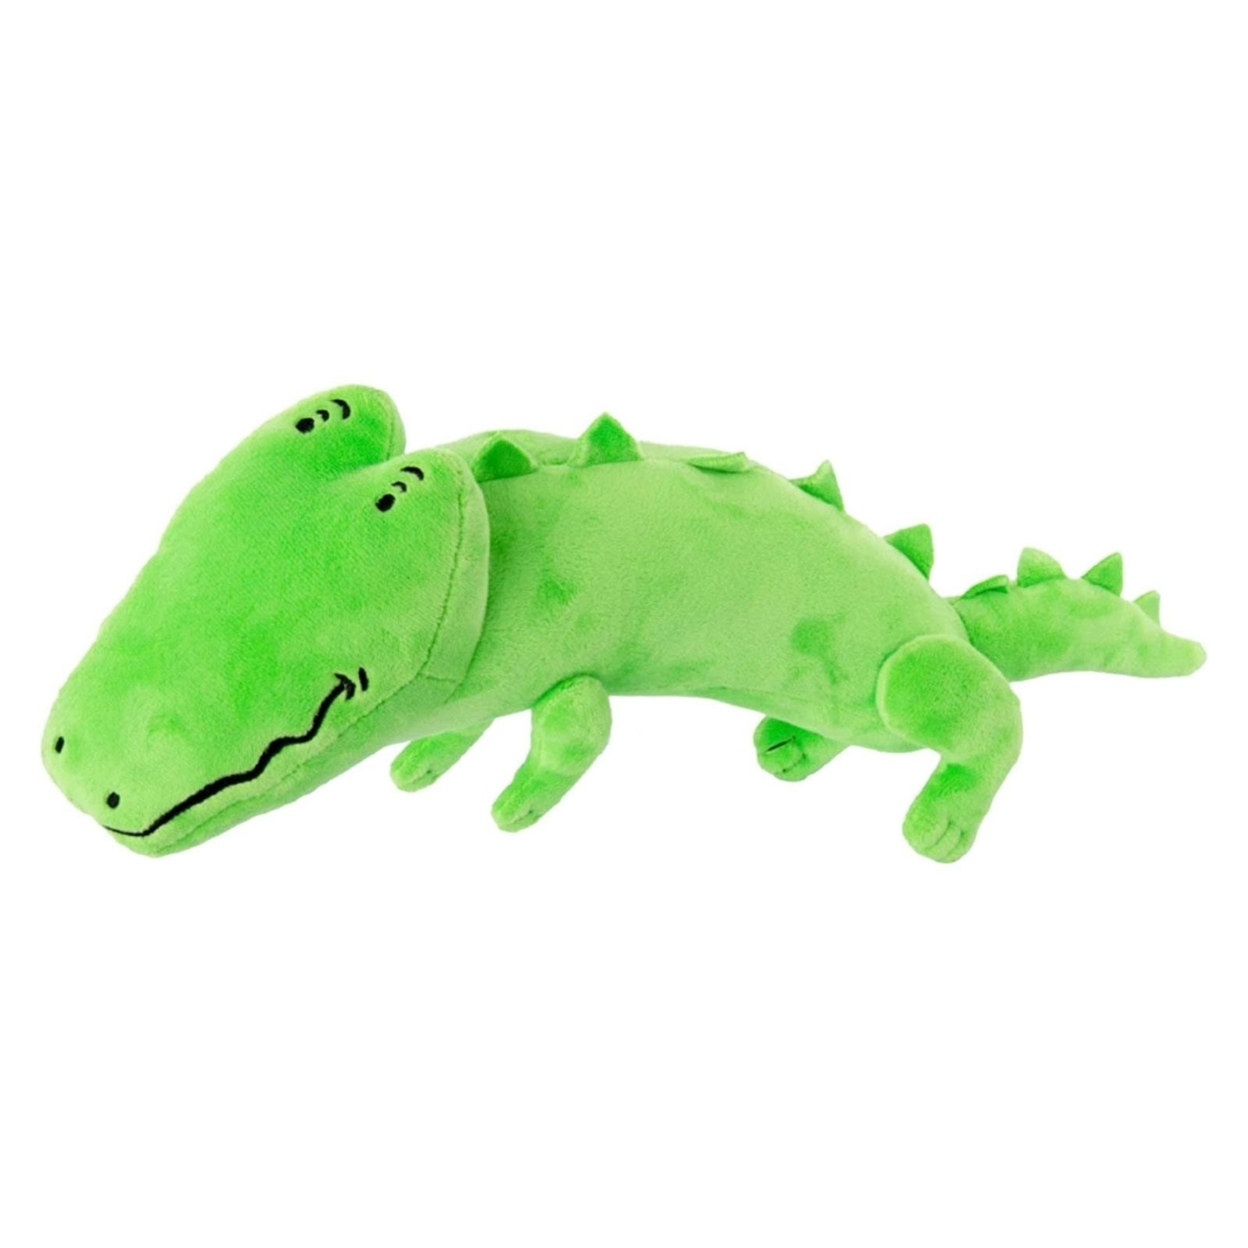 Lyle Lyle The Crocodile Plush 15 Doll Huggable Storybook Book Character Mighty Mojo